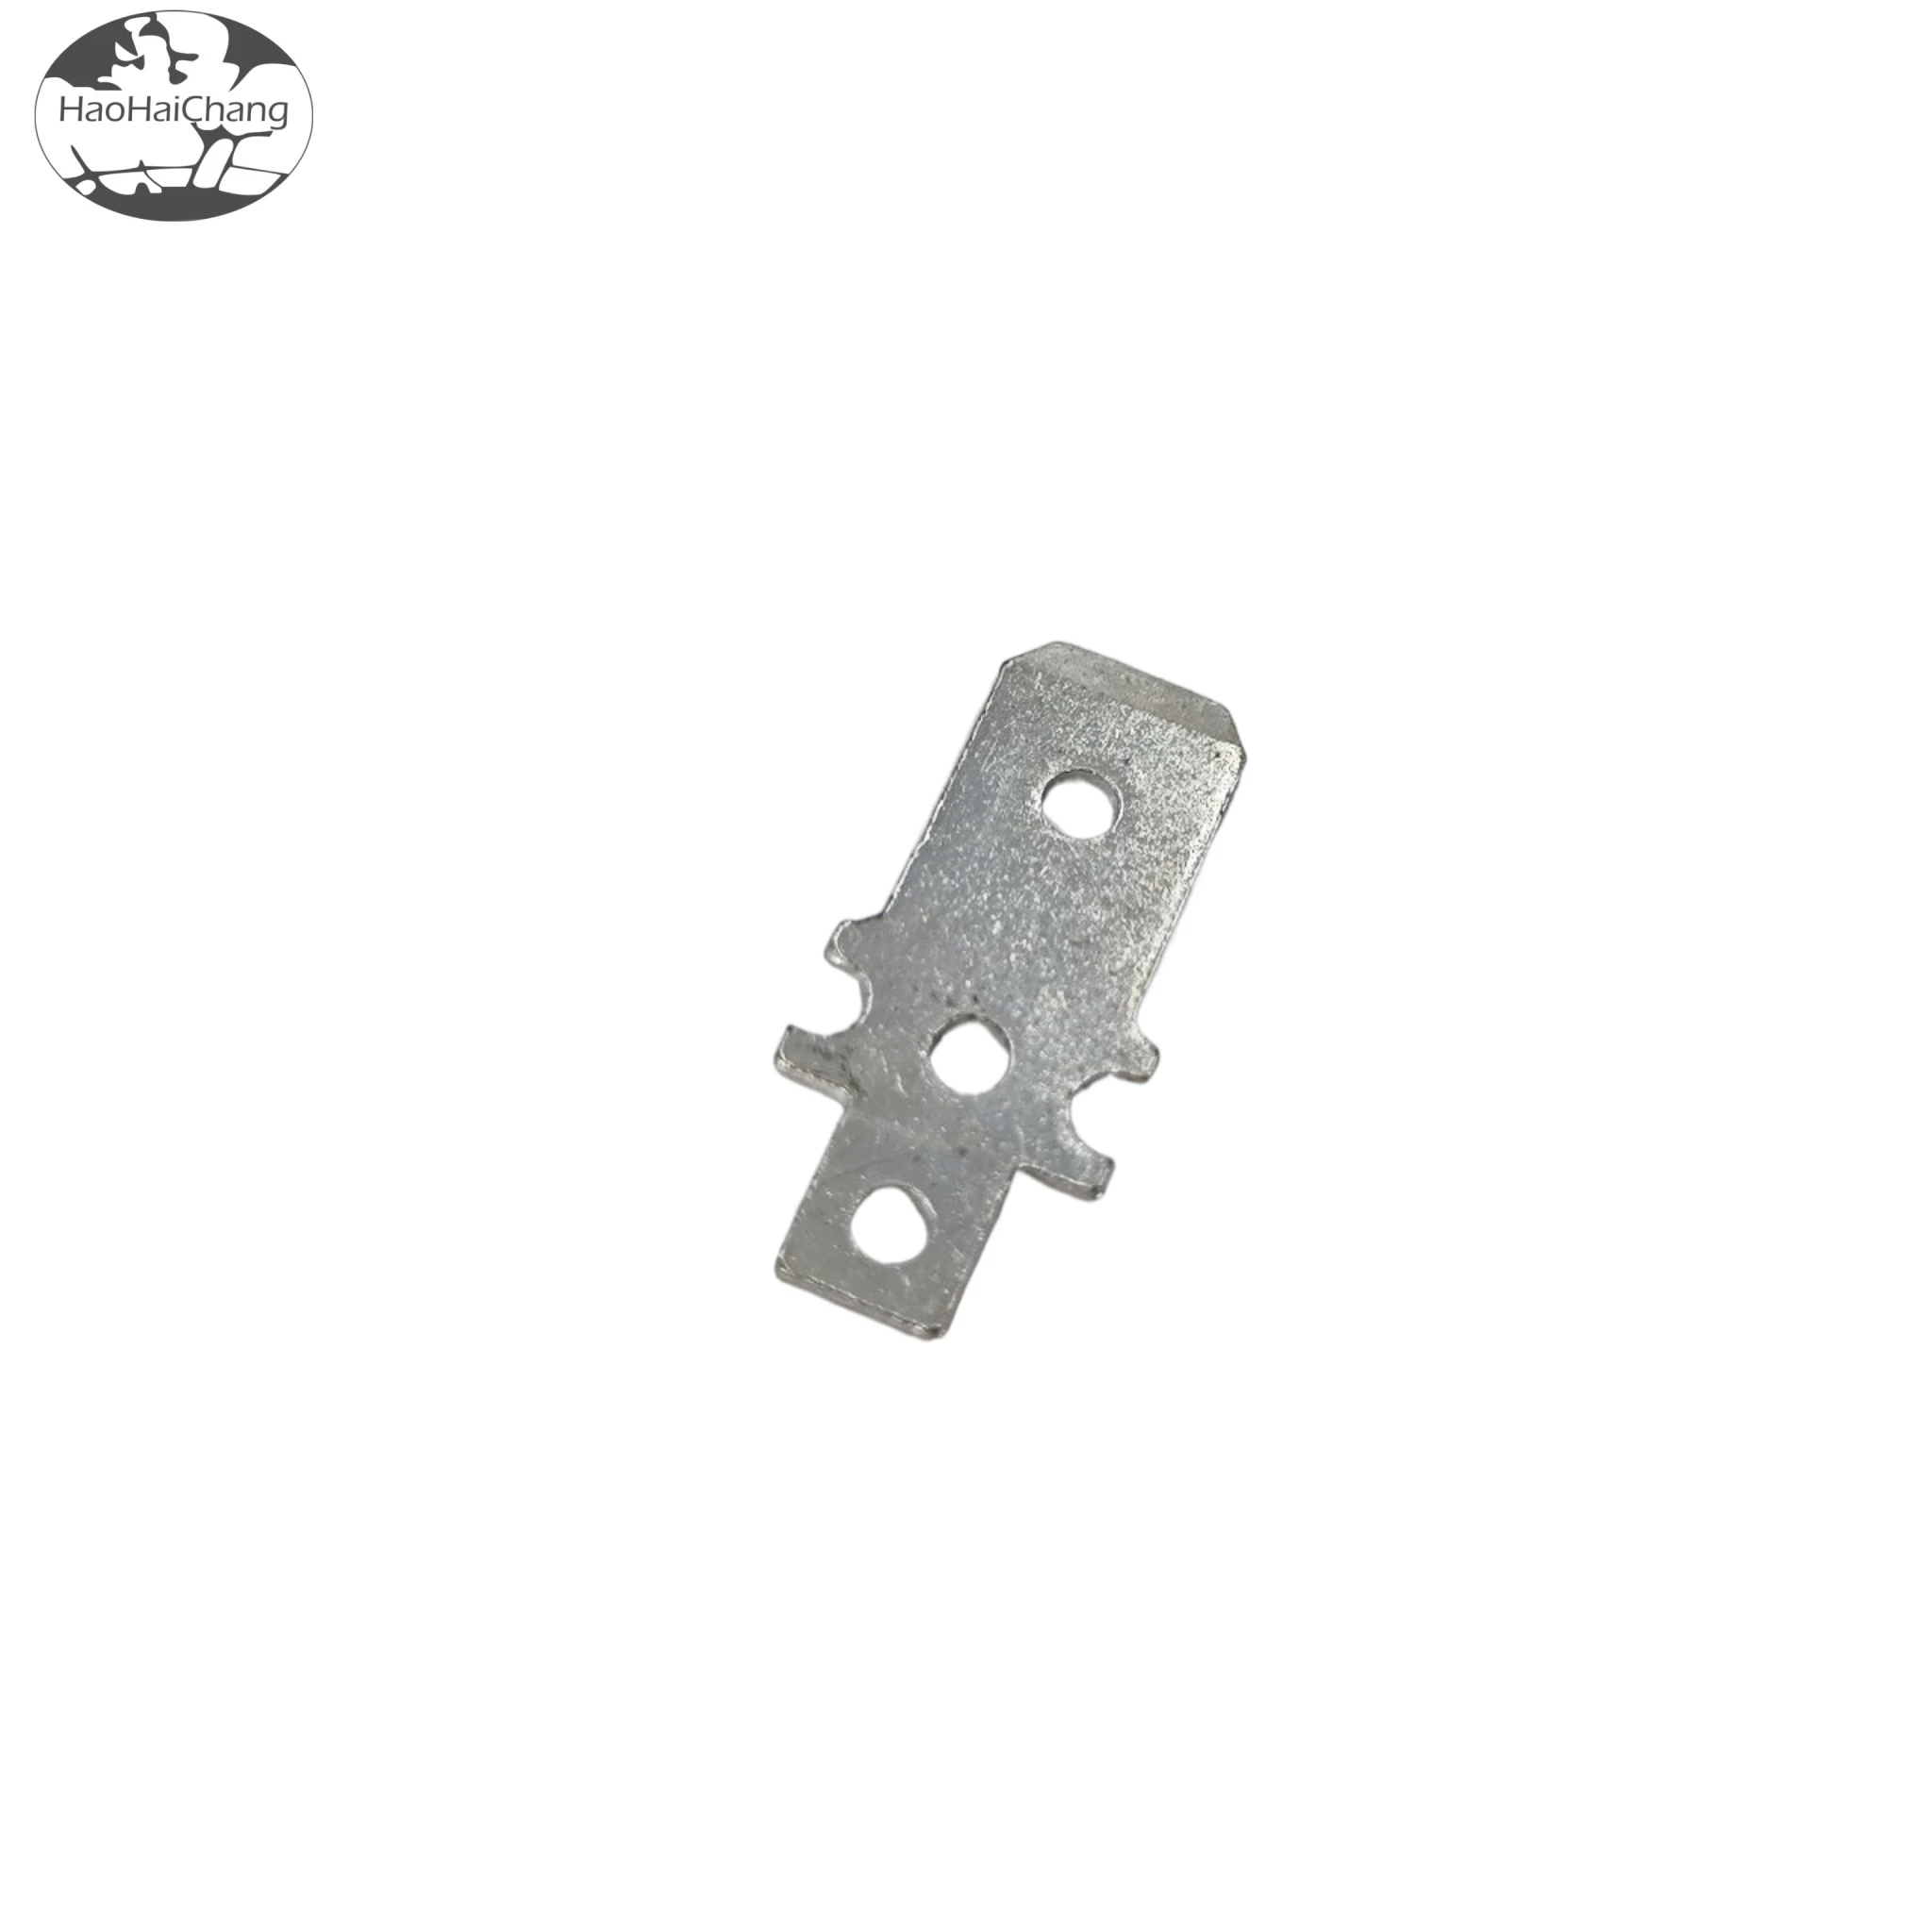 HHC-0124 Connector